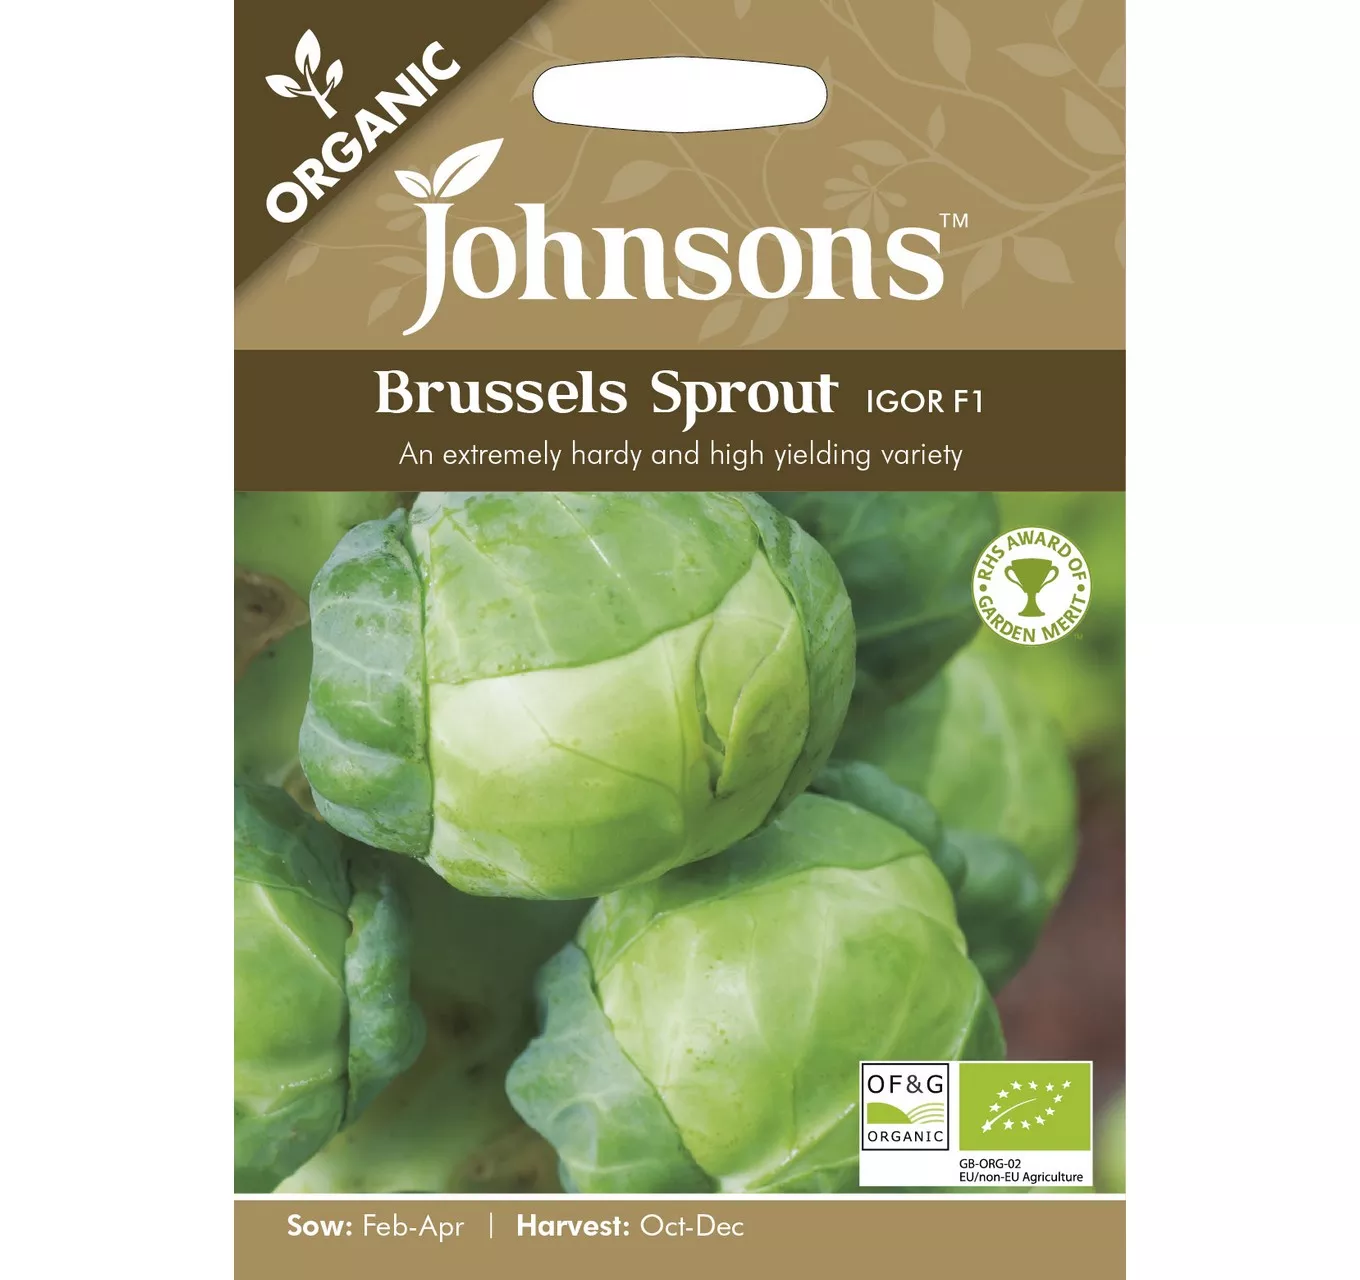 ORG Brussels Sprout Igor F1